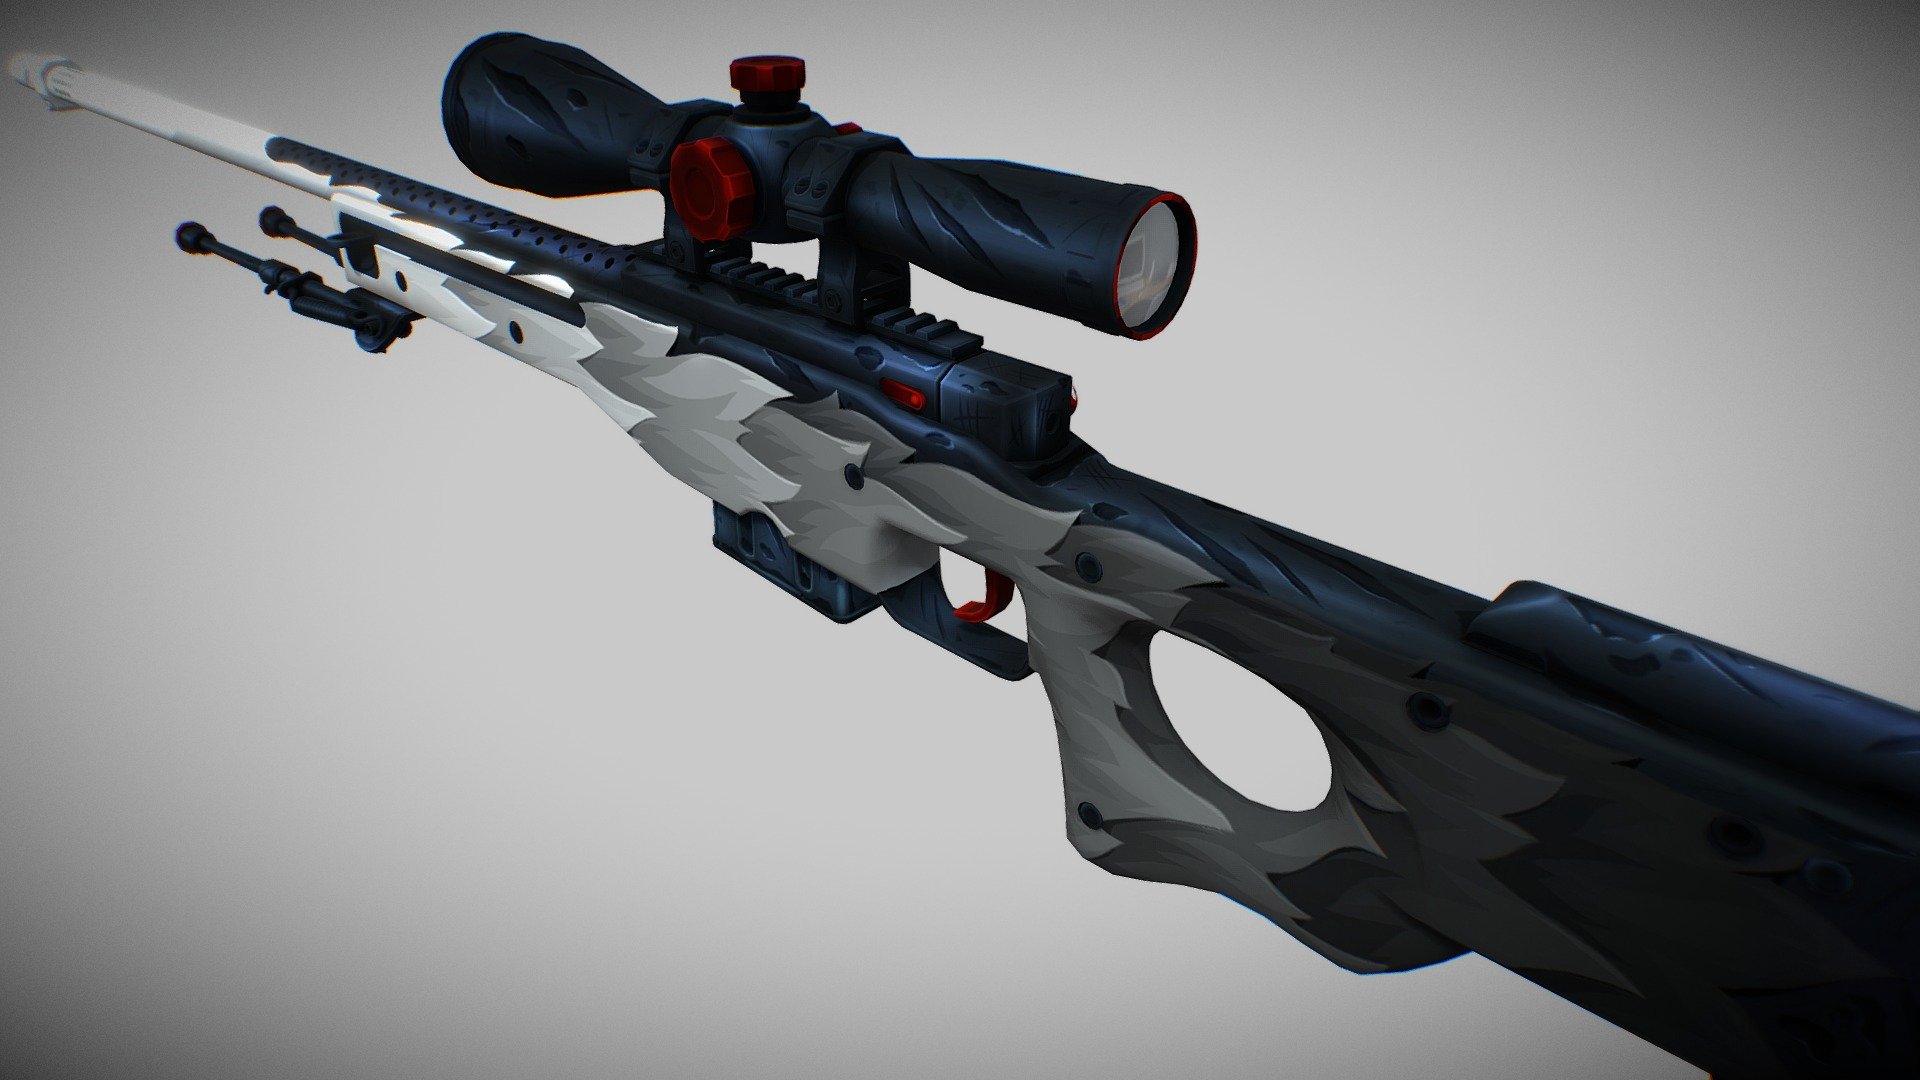 awp CS:GO skin

workshop link: https://steamcommunity.com/sharedfiles/filedetails/?id=1312918286&amp;searchtext= - WHITE FANG (Arctic Wolf) :: AWP - 3D model by vlad_icobet 3d model